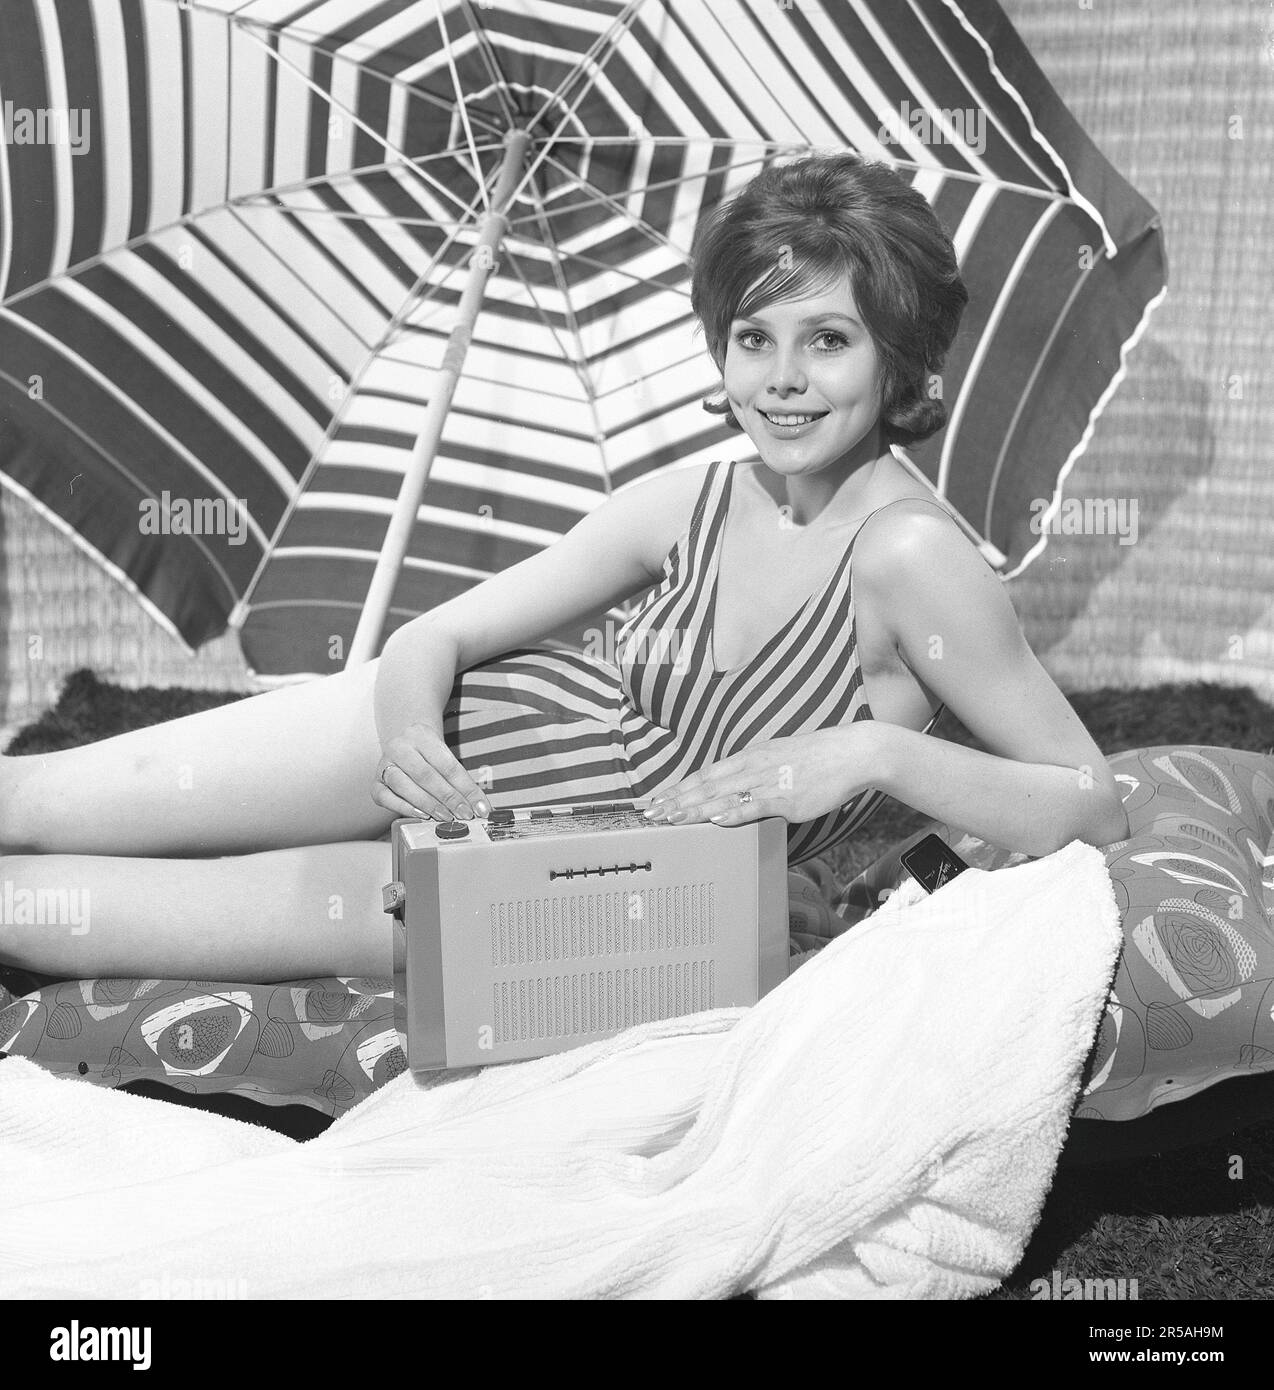 1960s summer lifestyle. A young woman pictured in a photographers studio wearing a bathingsuit with a portable radio. The sunshade parasol in the background is placed there to add to the summer feeling.  Sweden 1960 Photo Kristoffersson Ref CL114-10 Stock Photo